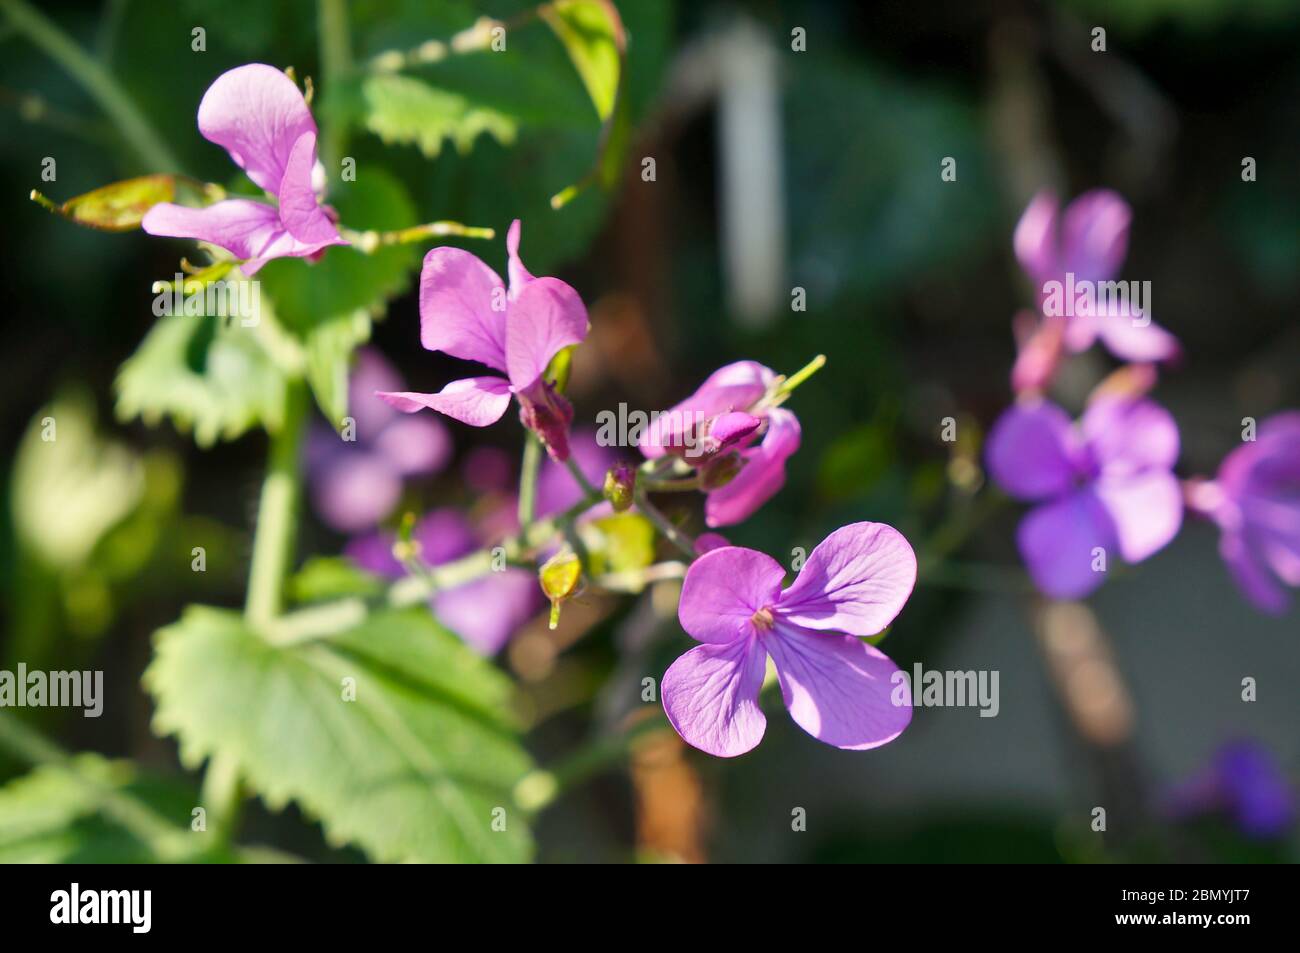 Honesty 'Lunaria' flowers growing in the wild Stock Photo